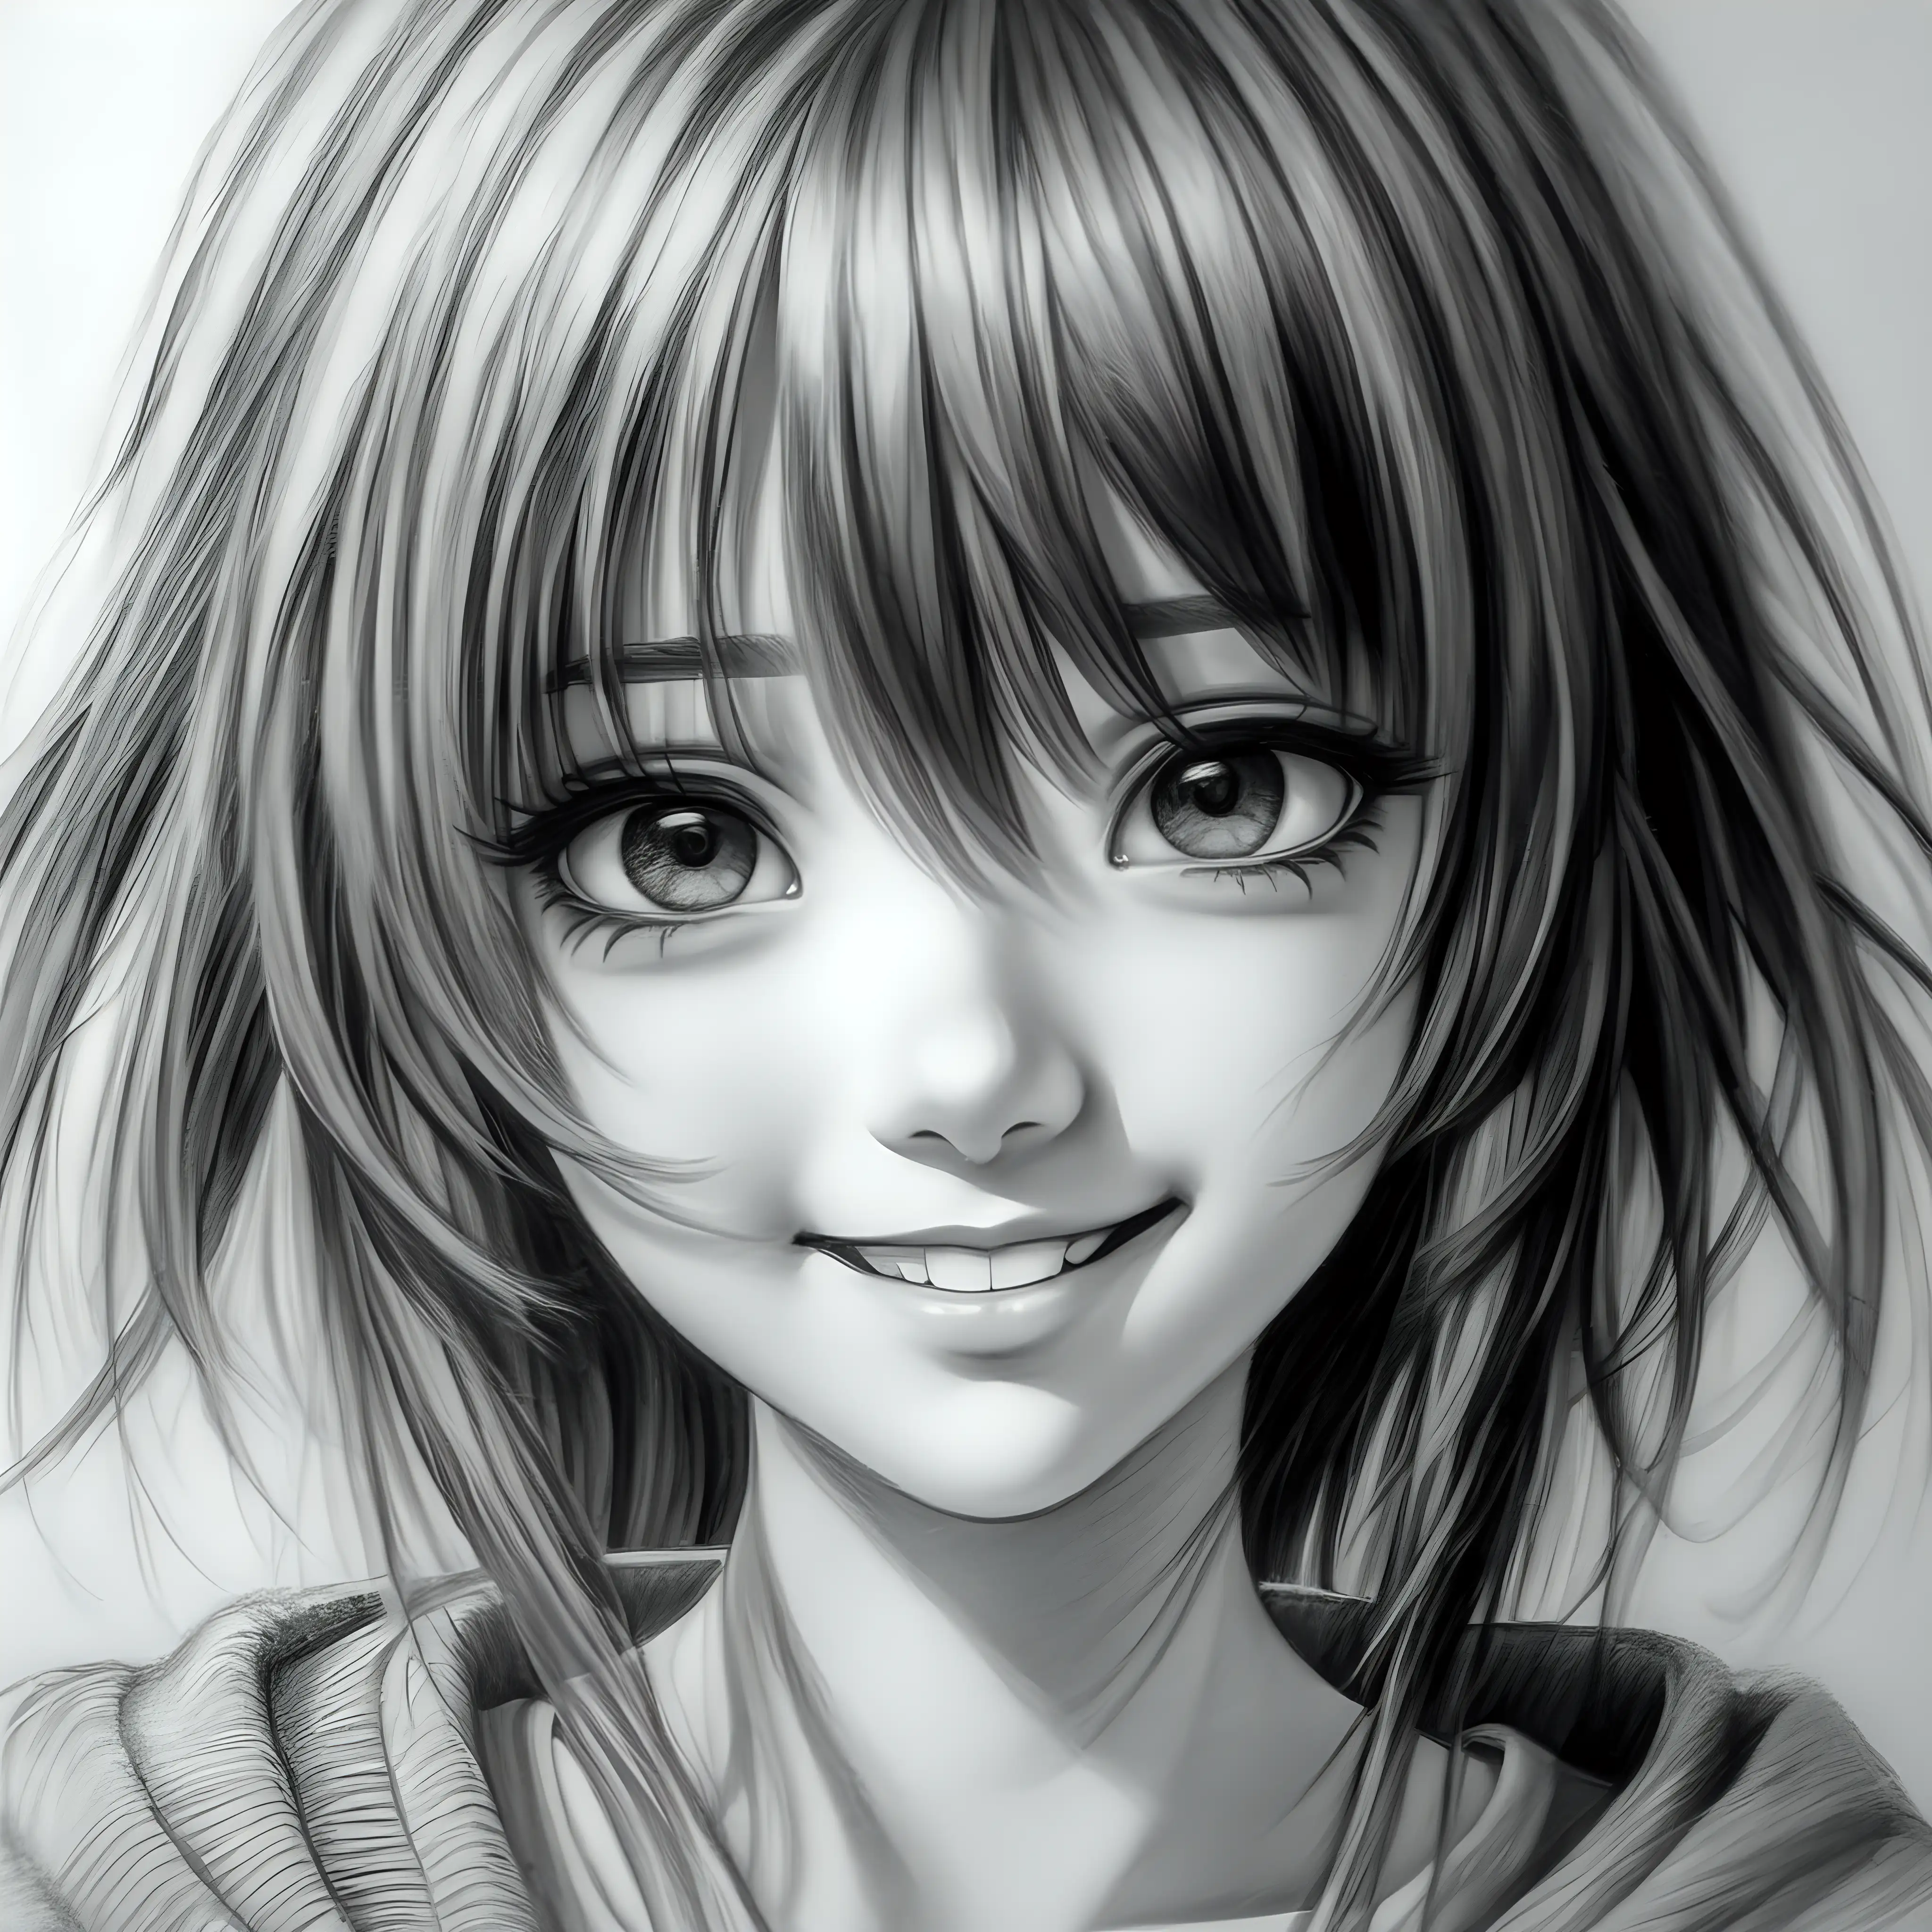 Captivating Charcoal Portrait Beautiful Anime Girl with Expressive Eyes and Delicate Features